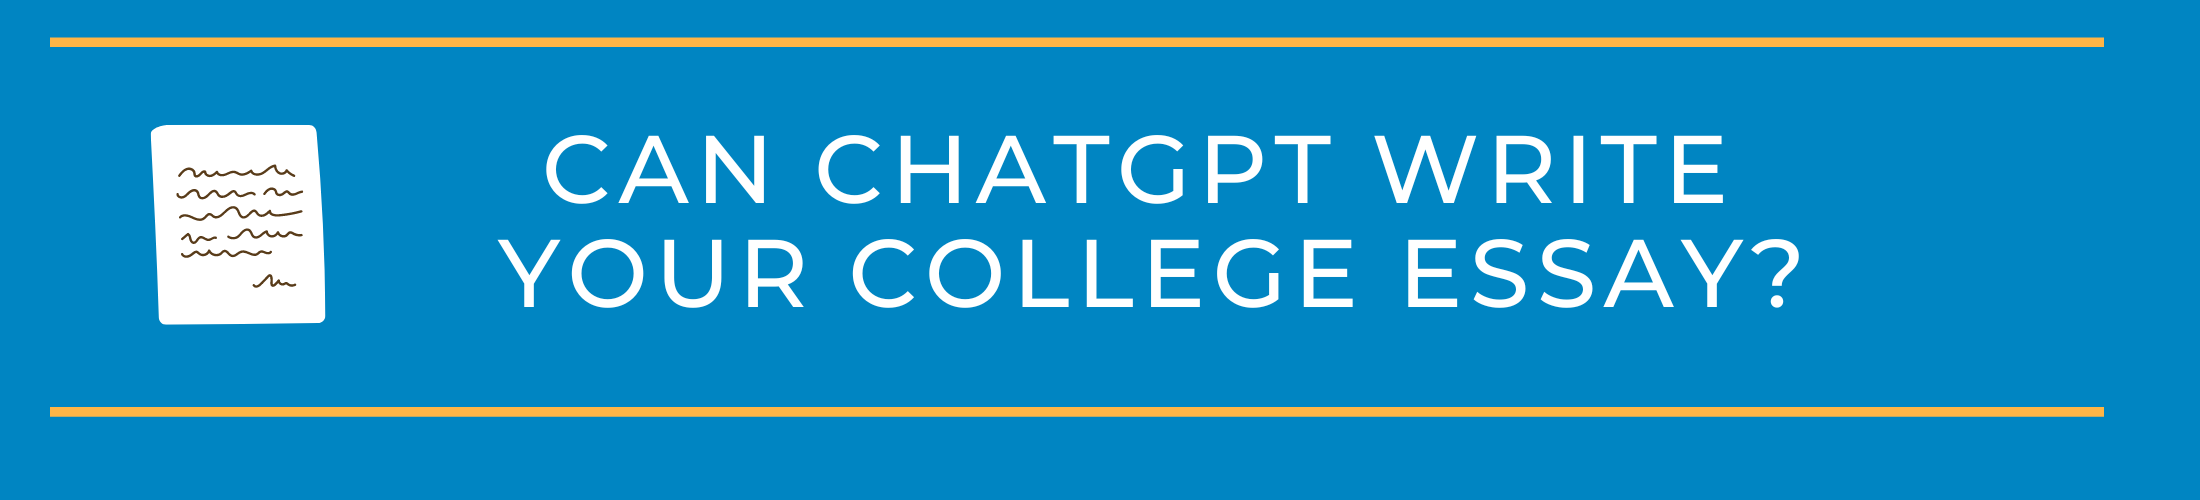 Can ChatGPT Write Your College Essay?